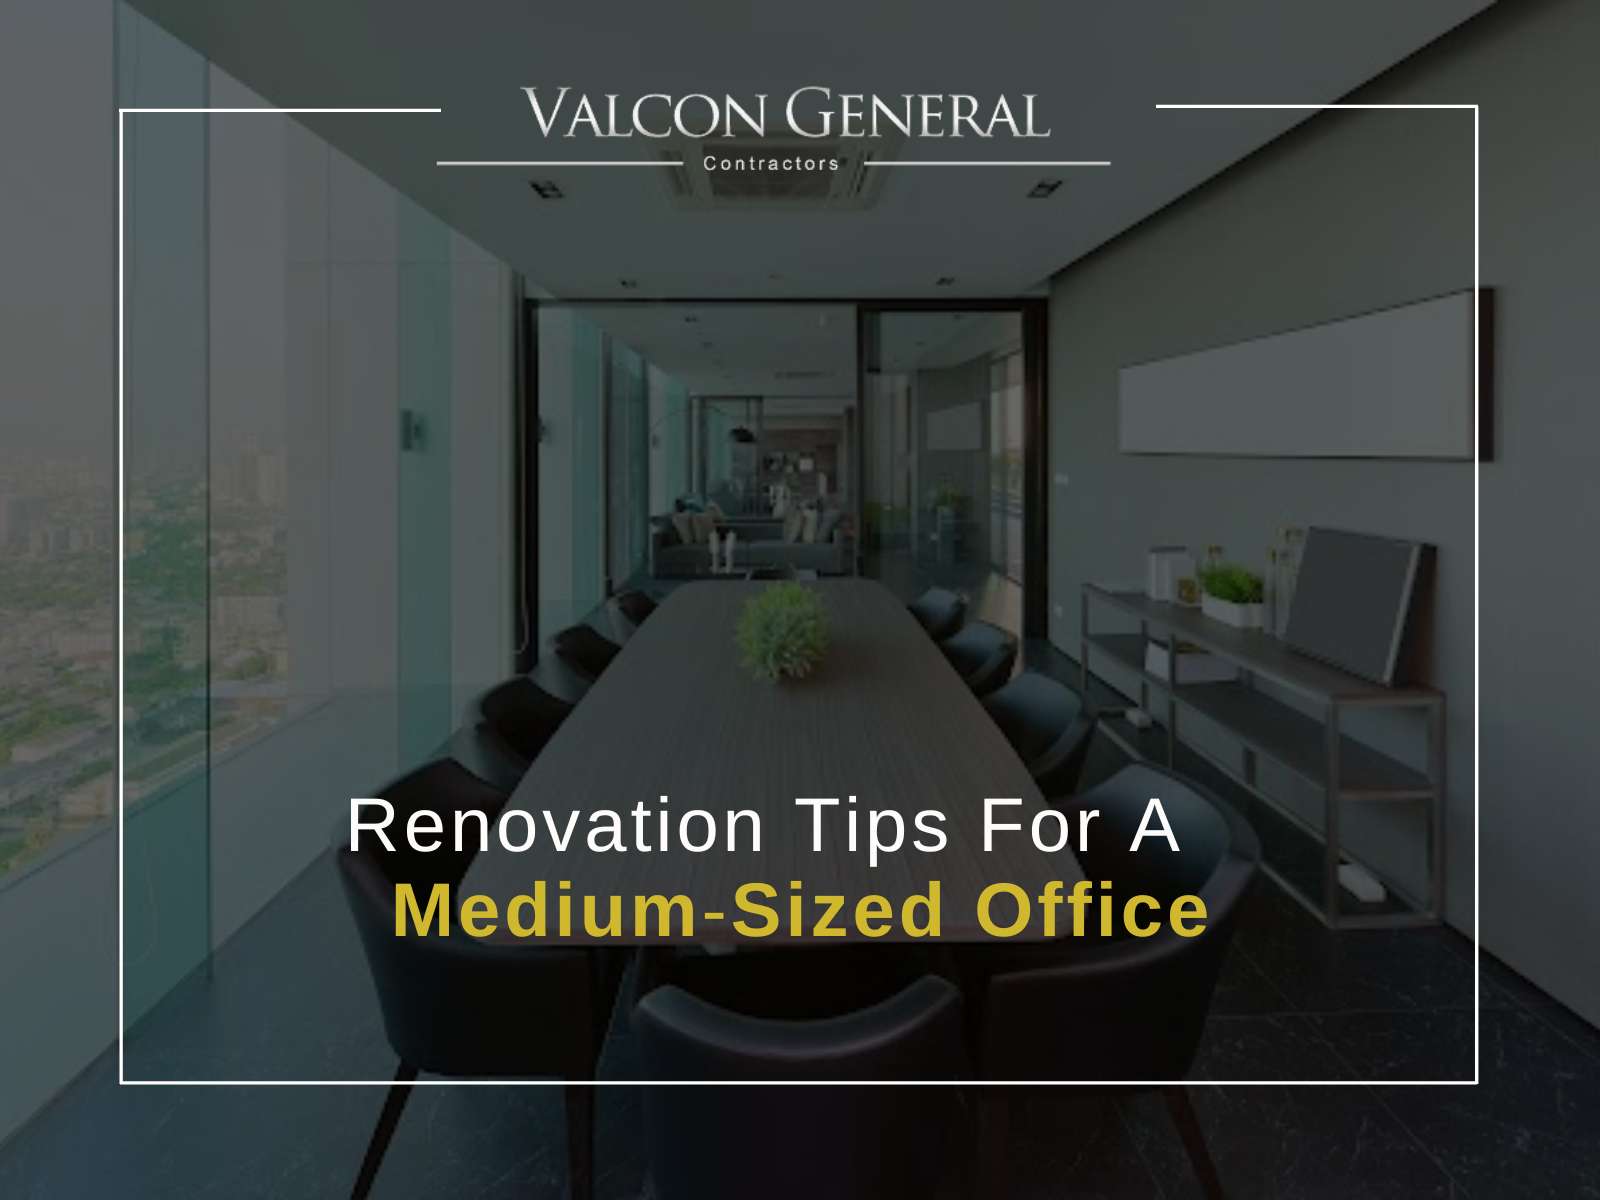 Renovation Tips For A Medium-Sized Office